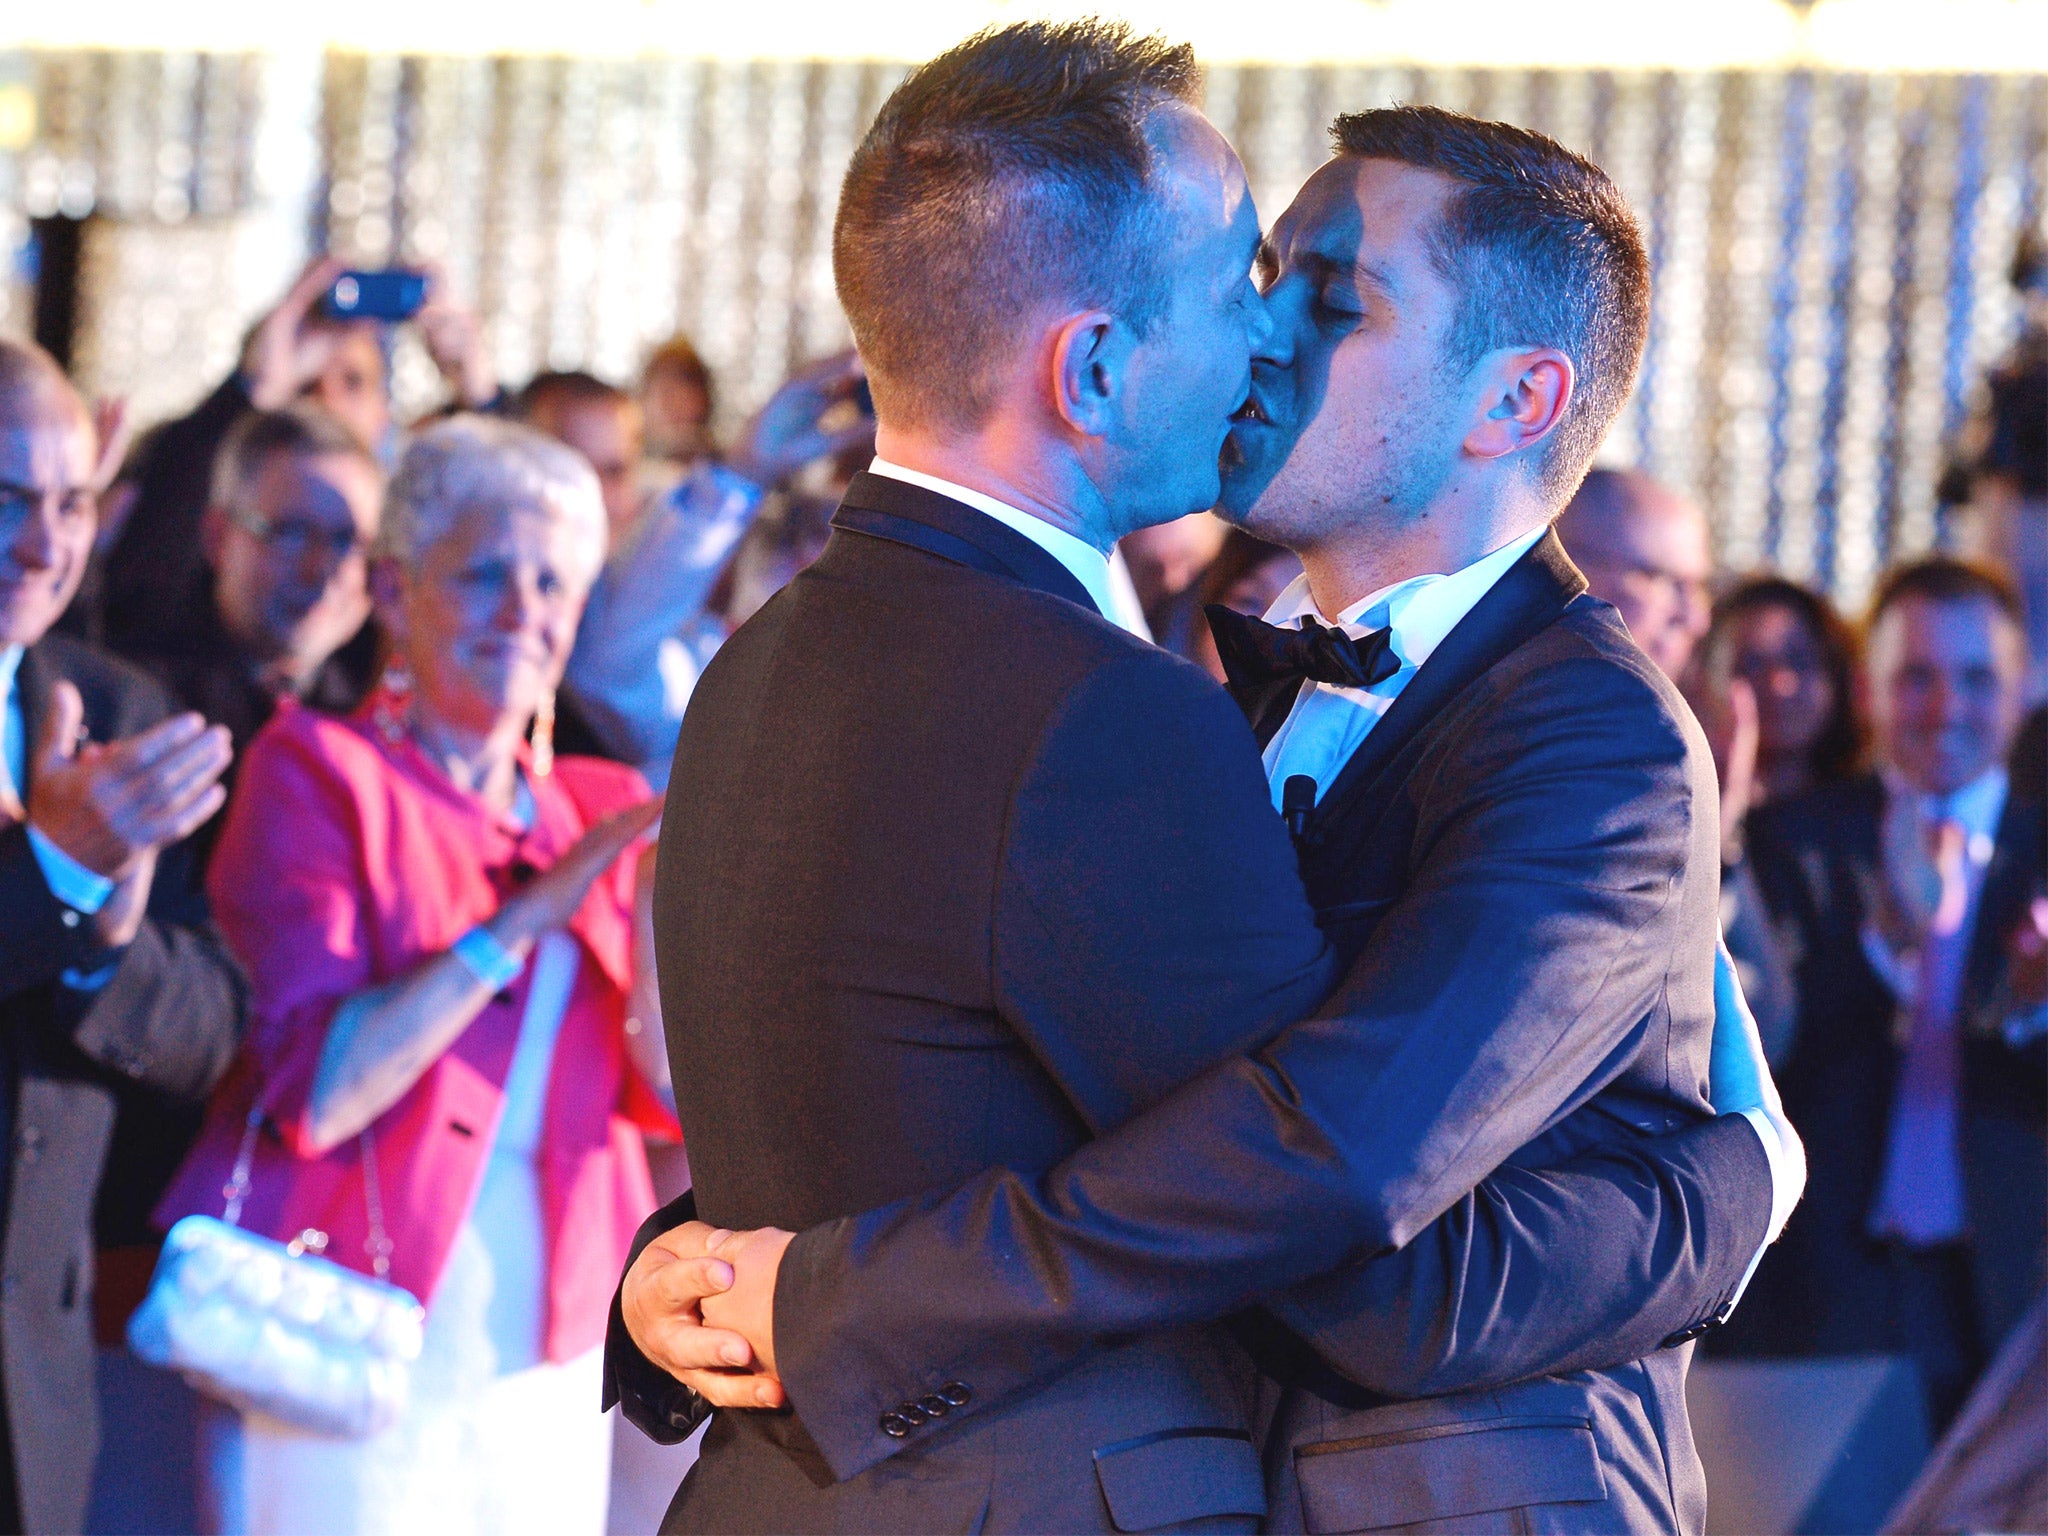 Vincent Autin, left, and Bruno Boileau kiss at France’s first official gay marriage in Montpellier